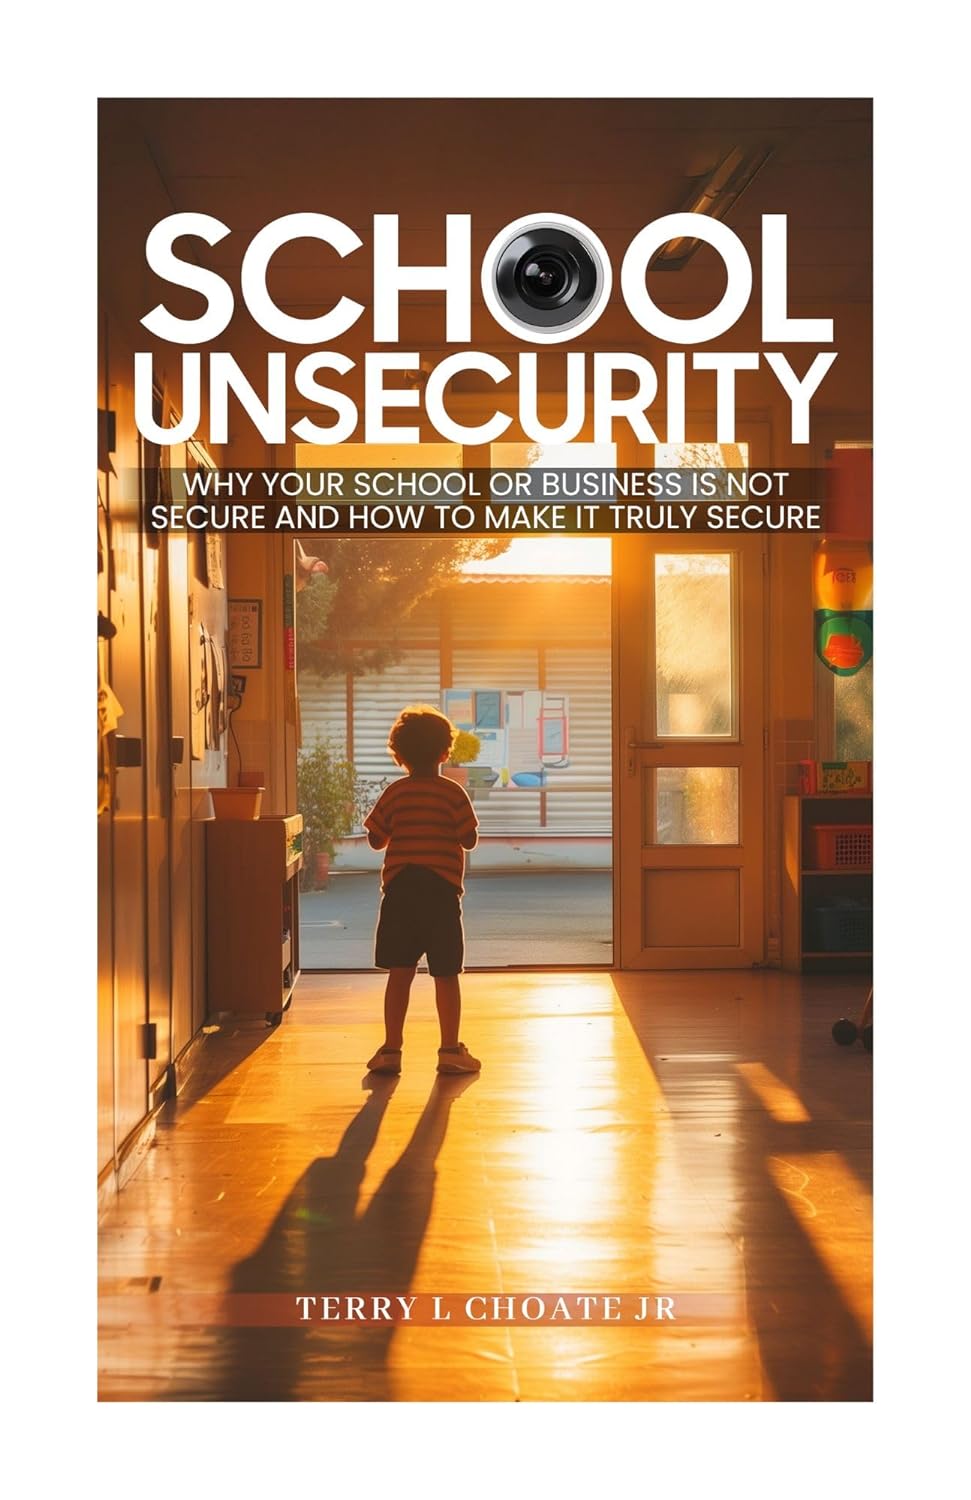 Book cover titled "School Unsecurity" by Terry L Choate Jr, featuring a photo of a child standing in a sunny hallway, with the subtitle "Why Your School or Business is Not Secure and How to Make It Truly Secure.